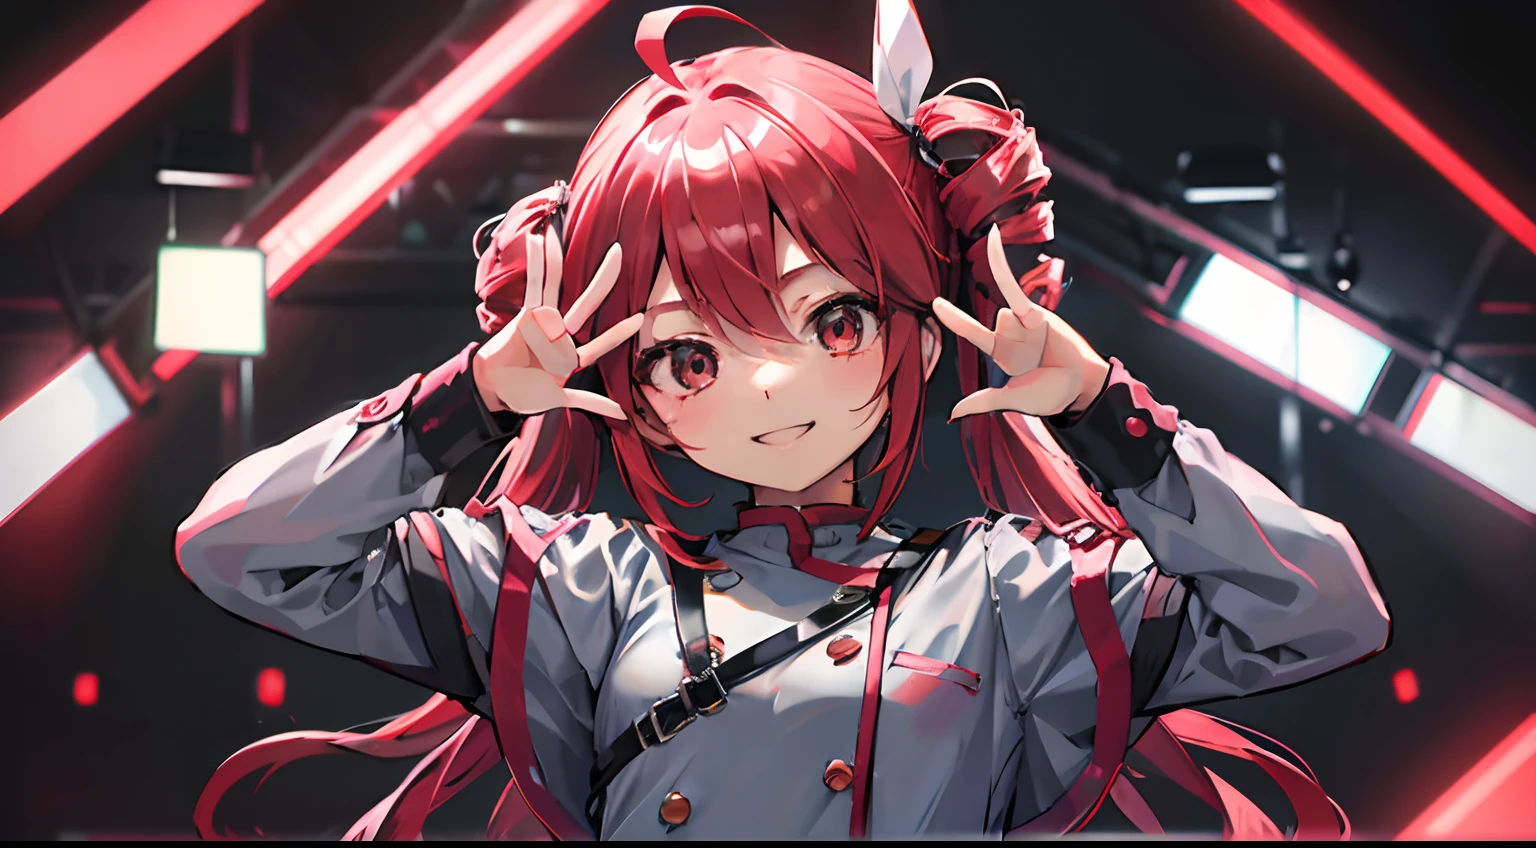 kawaii、1girl in、hiquality、((​masterpiece))、Idle Pose、Tet、KasaneTeto、Twindrill hair、Smile in public、at stage、red hairs、neat and clean clothes of neat gray color,